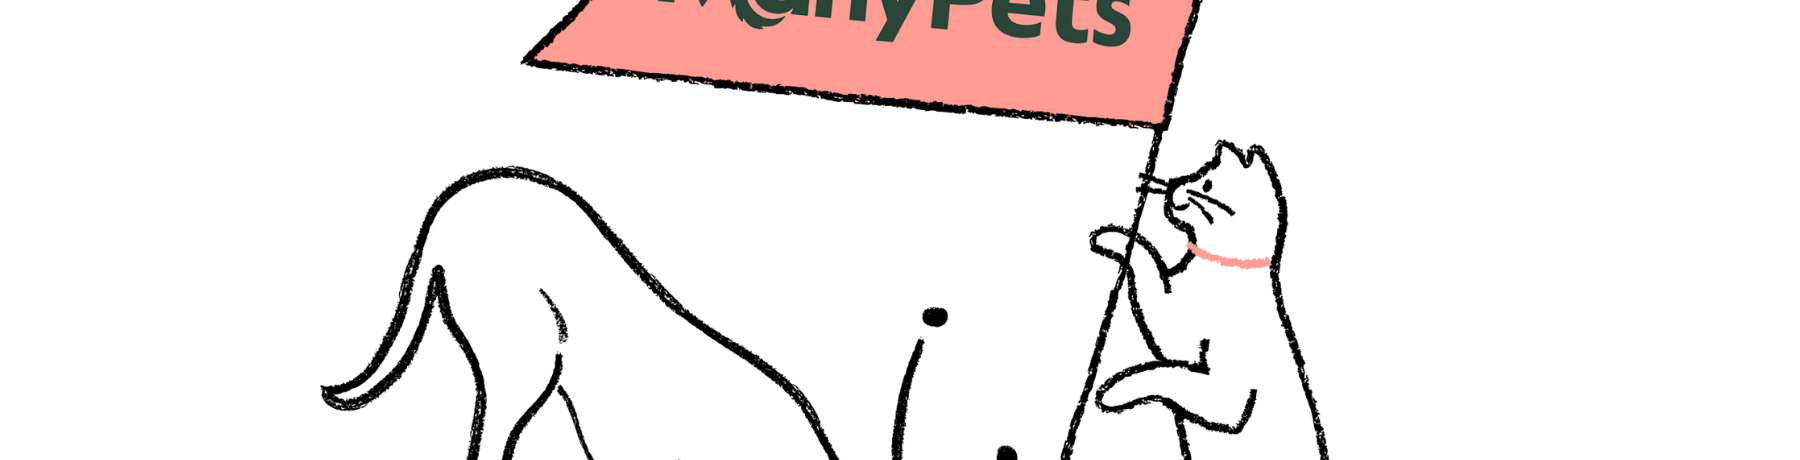 Introducing ManyPets - the new name for Bought By Many image